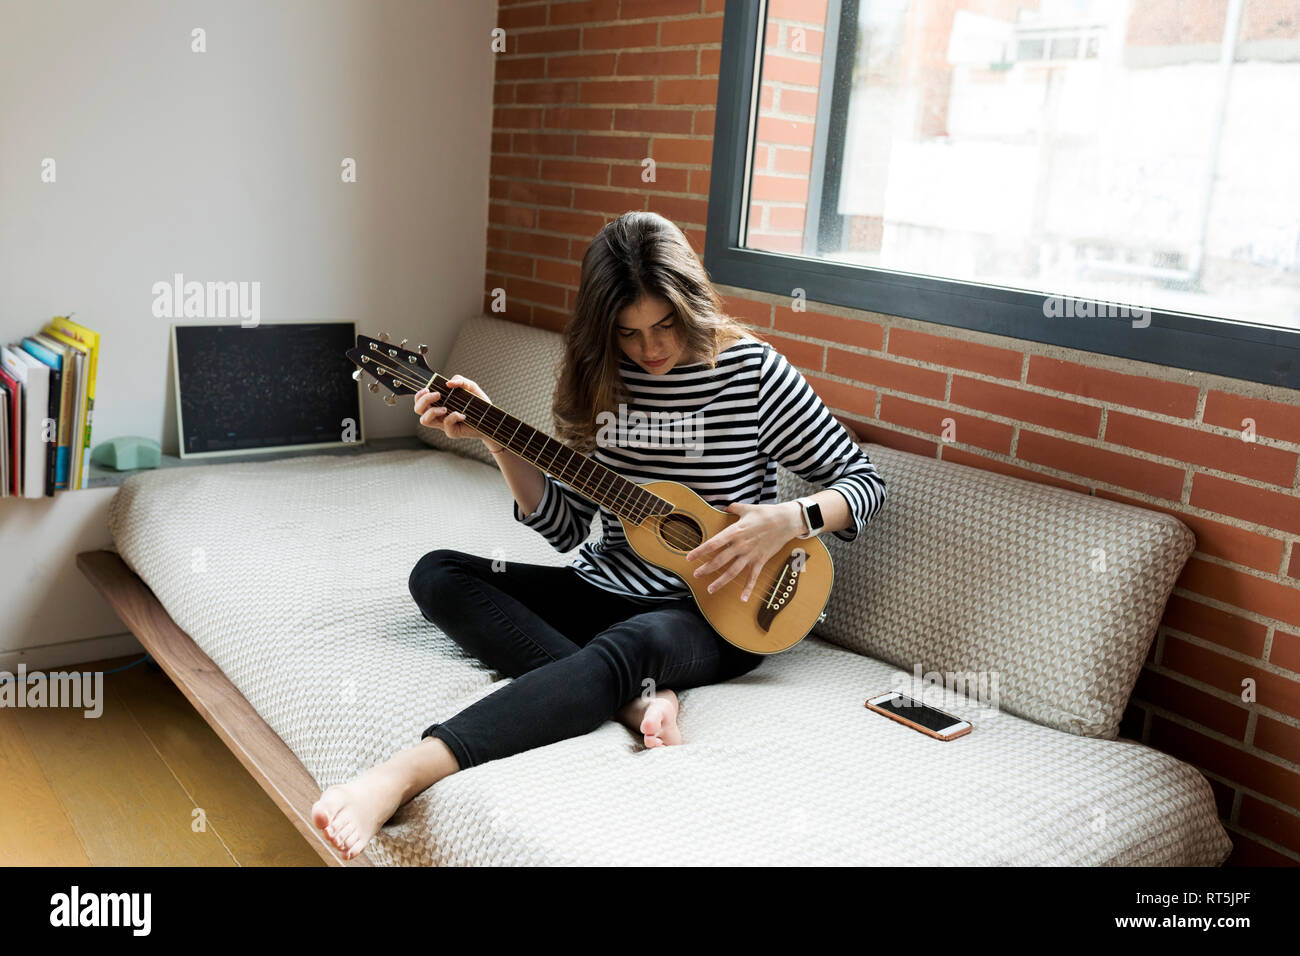 Young woman sitting on couch at home playing guitar Stock Photo